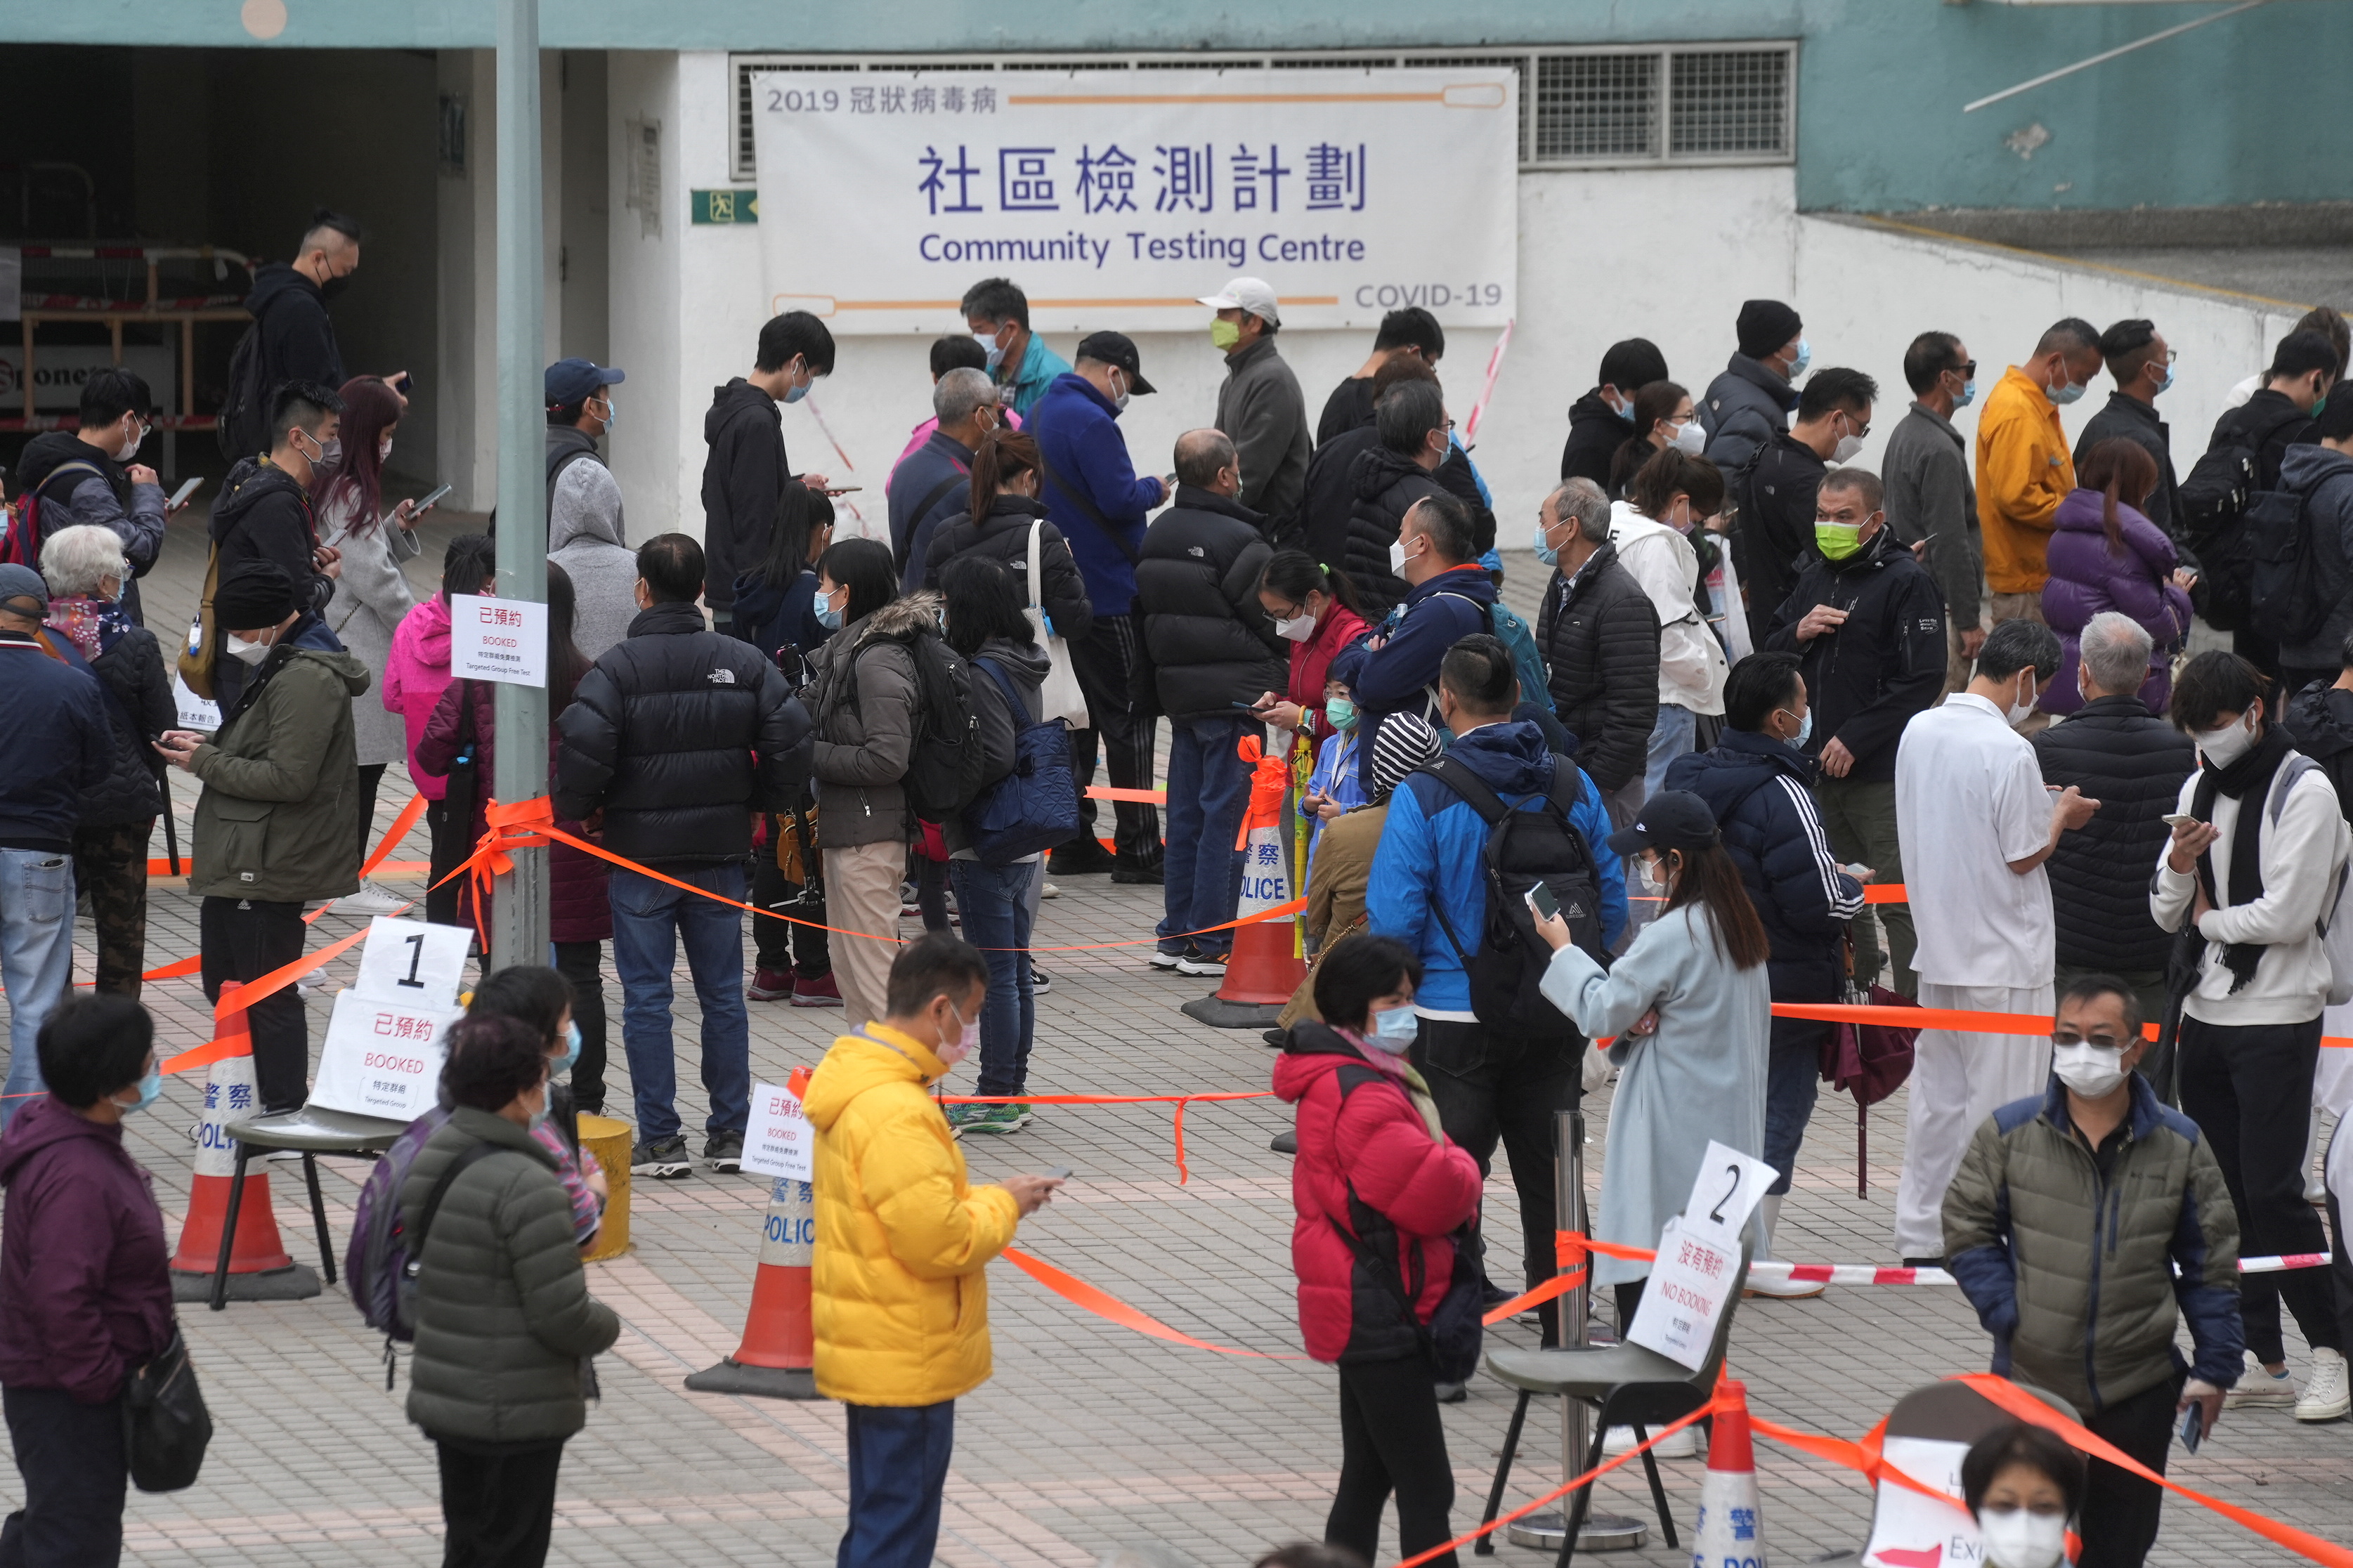 People wearing face masks queue at a community nucleic acid testing centre for the coronavirus disease (COVID-19) at Sha Tin district, in Hong Kong